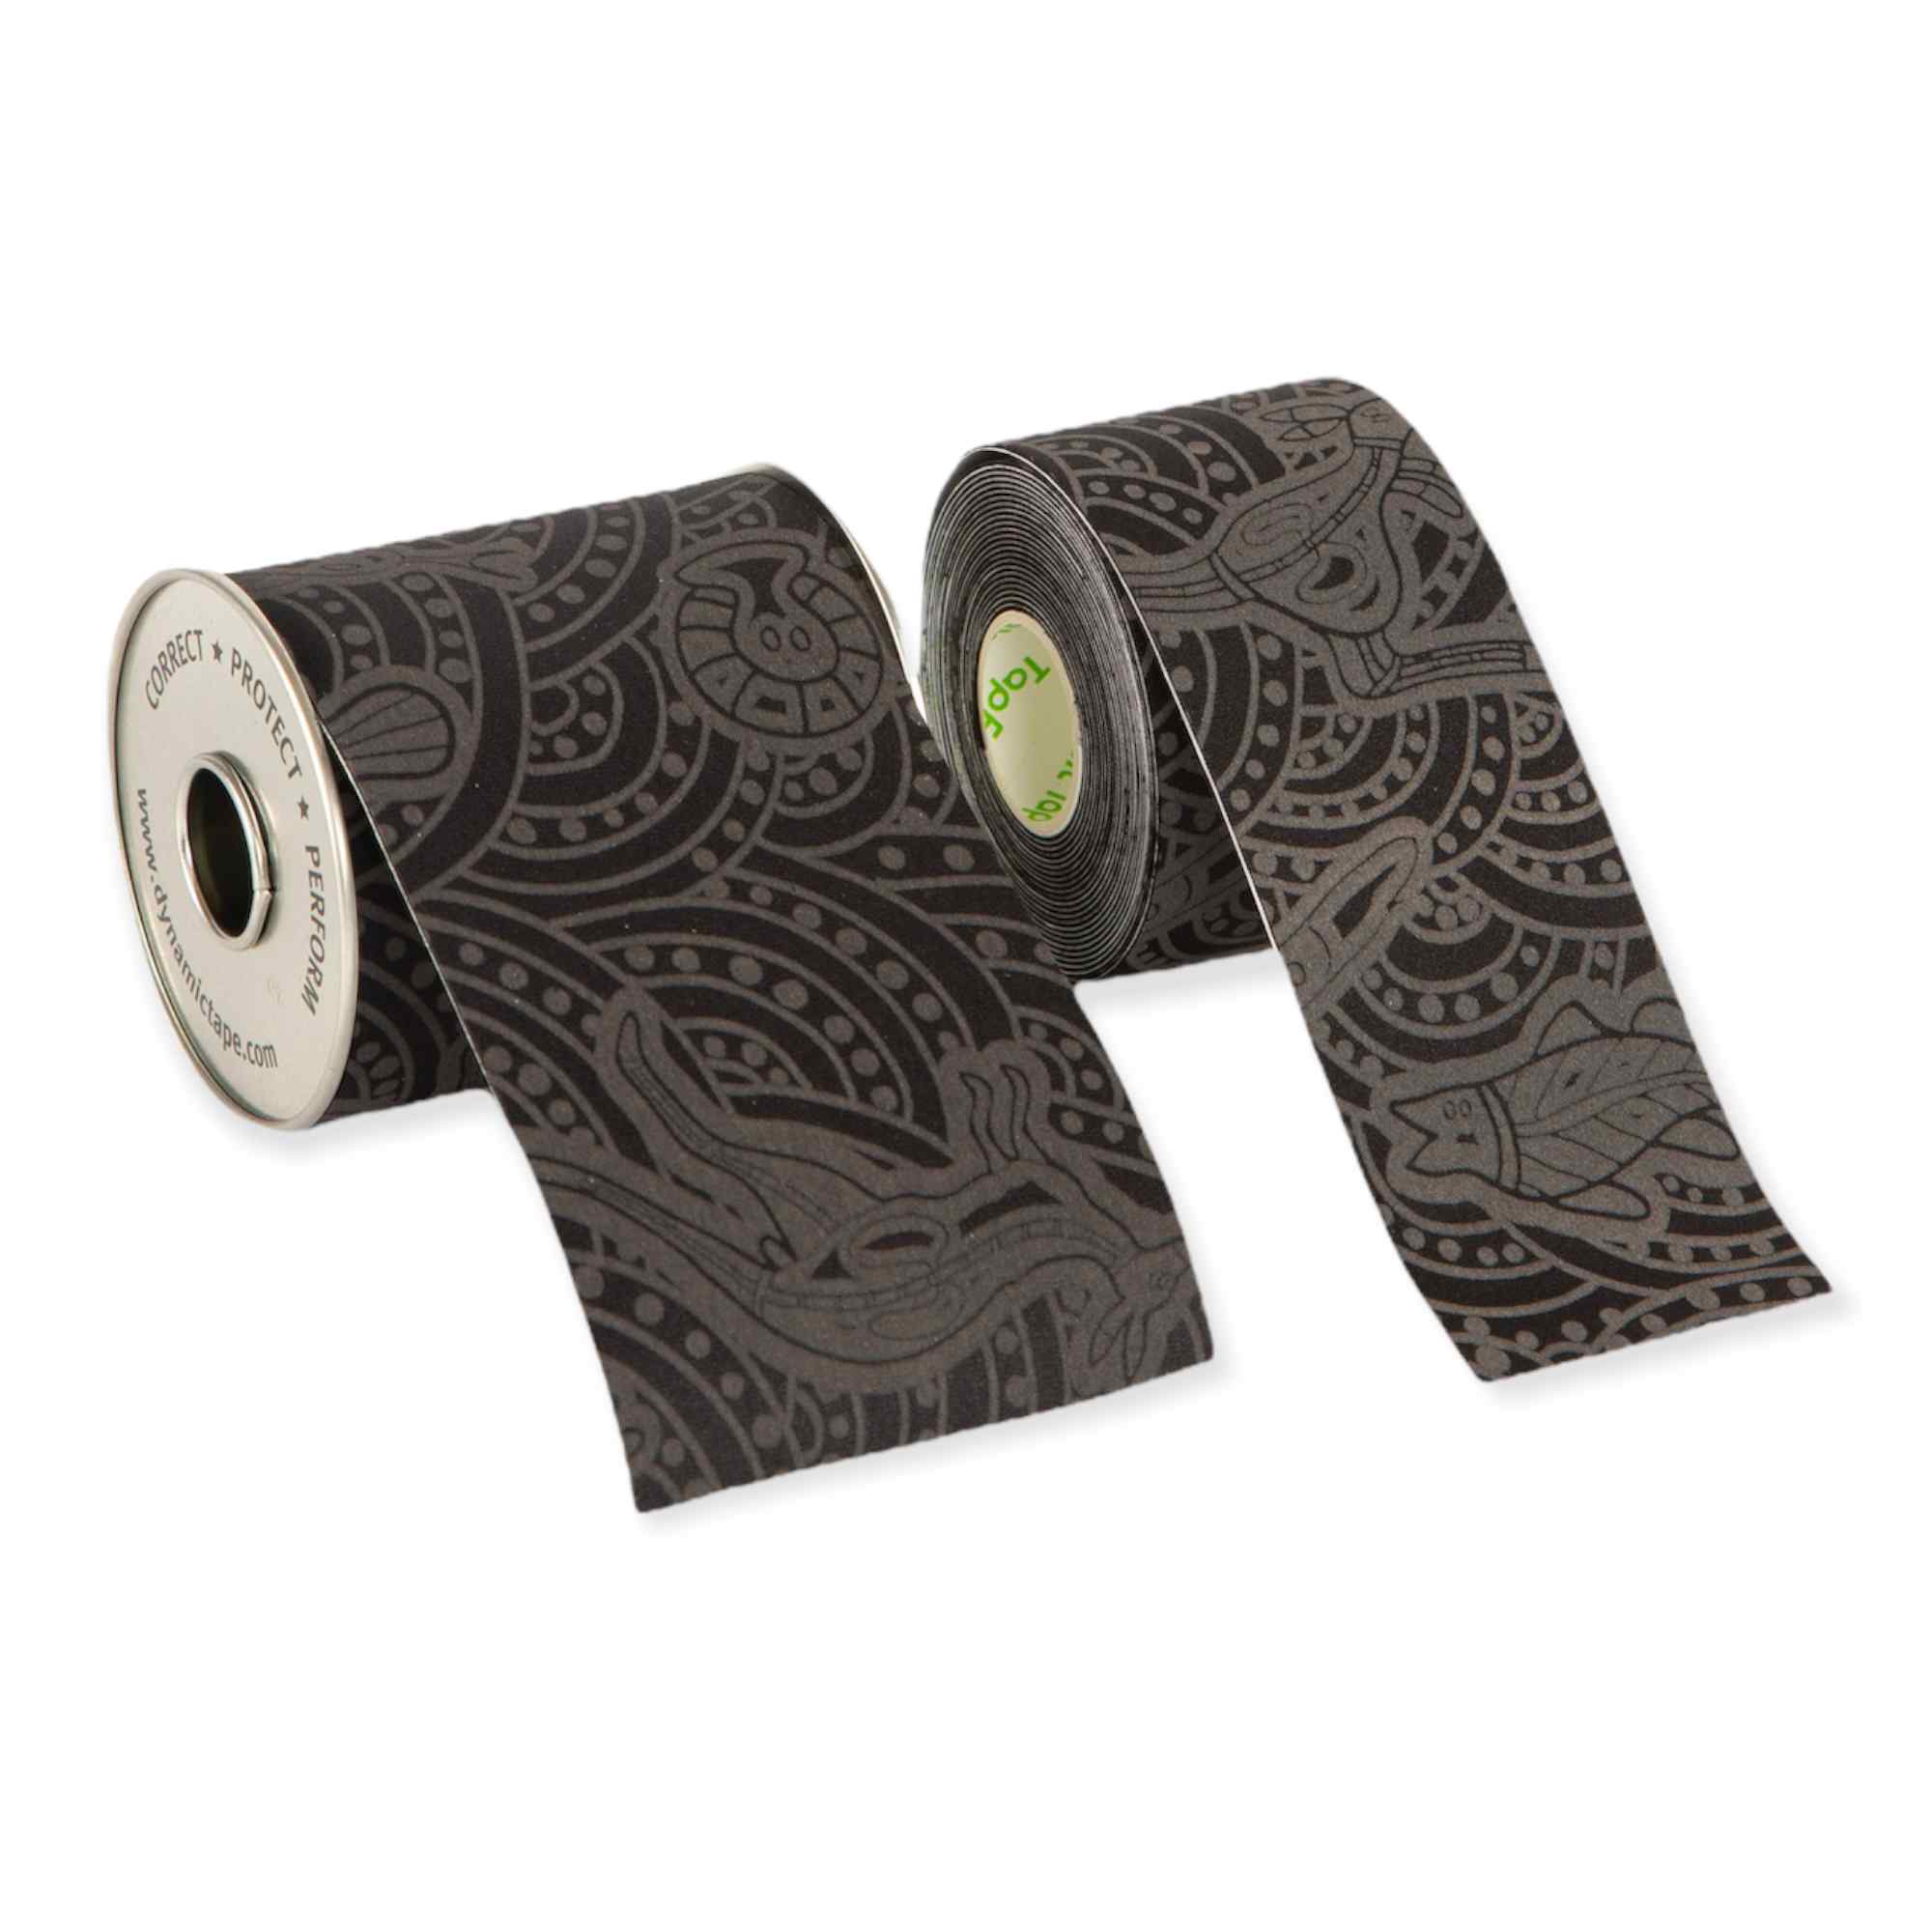 Dynamic Tape Eco - Tattoo - made from recycled plastic bottles